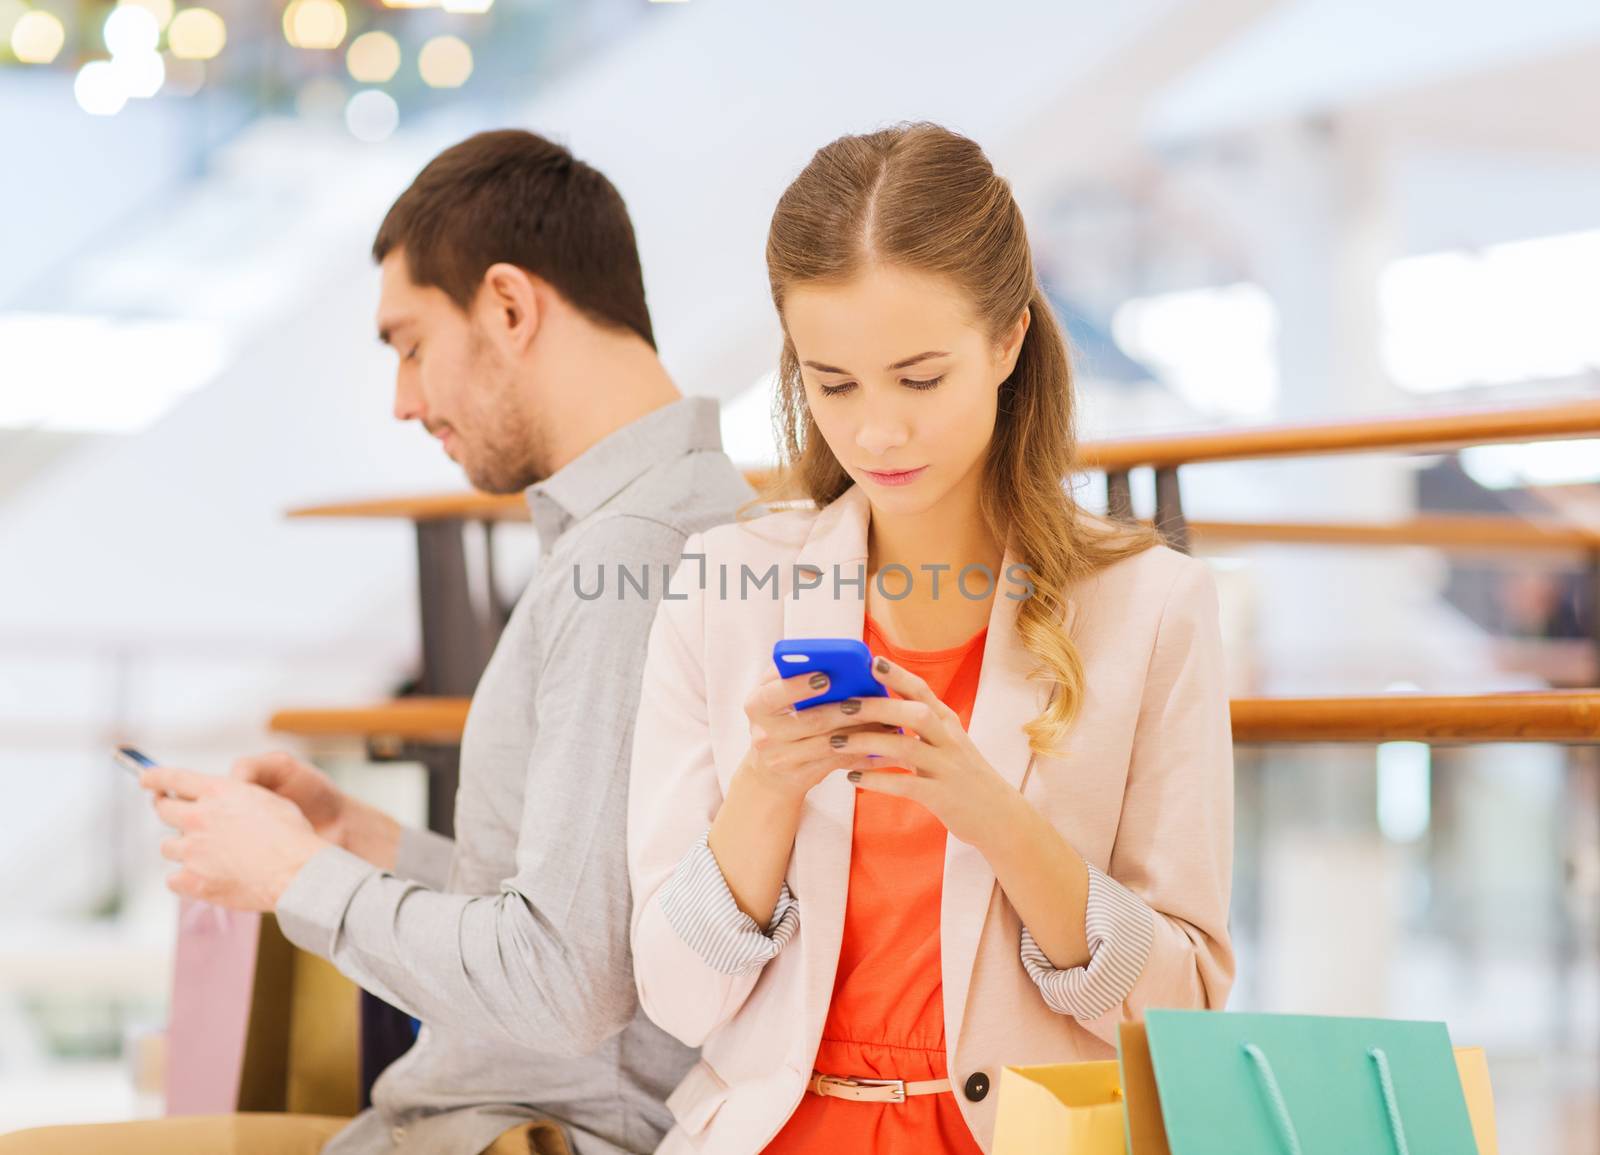 couple with smartphones and shopping bags in mall by dolgachov